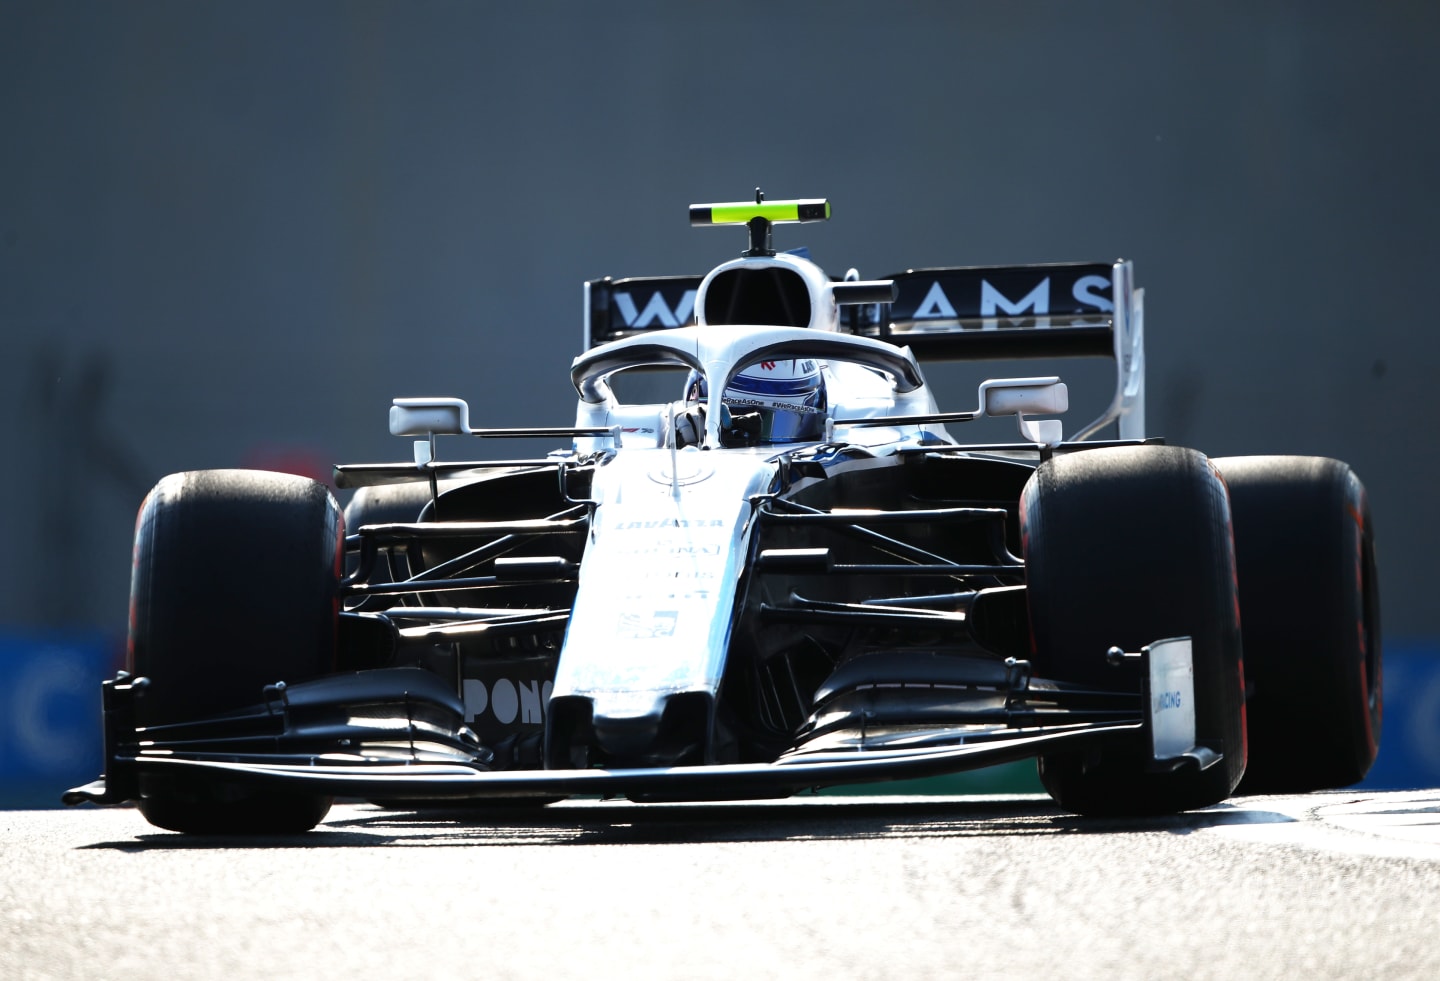 ABU DHABI, UNITED ARAB EMIRATES - DECEMBER 12: Nicholas Latifi of Canada driving the (6) Williams Racing FW43 Mercedes on track during final practice ahead of the F1 Grand Prix of Abu Dhabi at Yas Marina Circuit on December 12, 2020 in Abu Dhabi, United Arab Emirates. (Photo by Bryn Lennon/Getty Images)